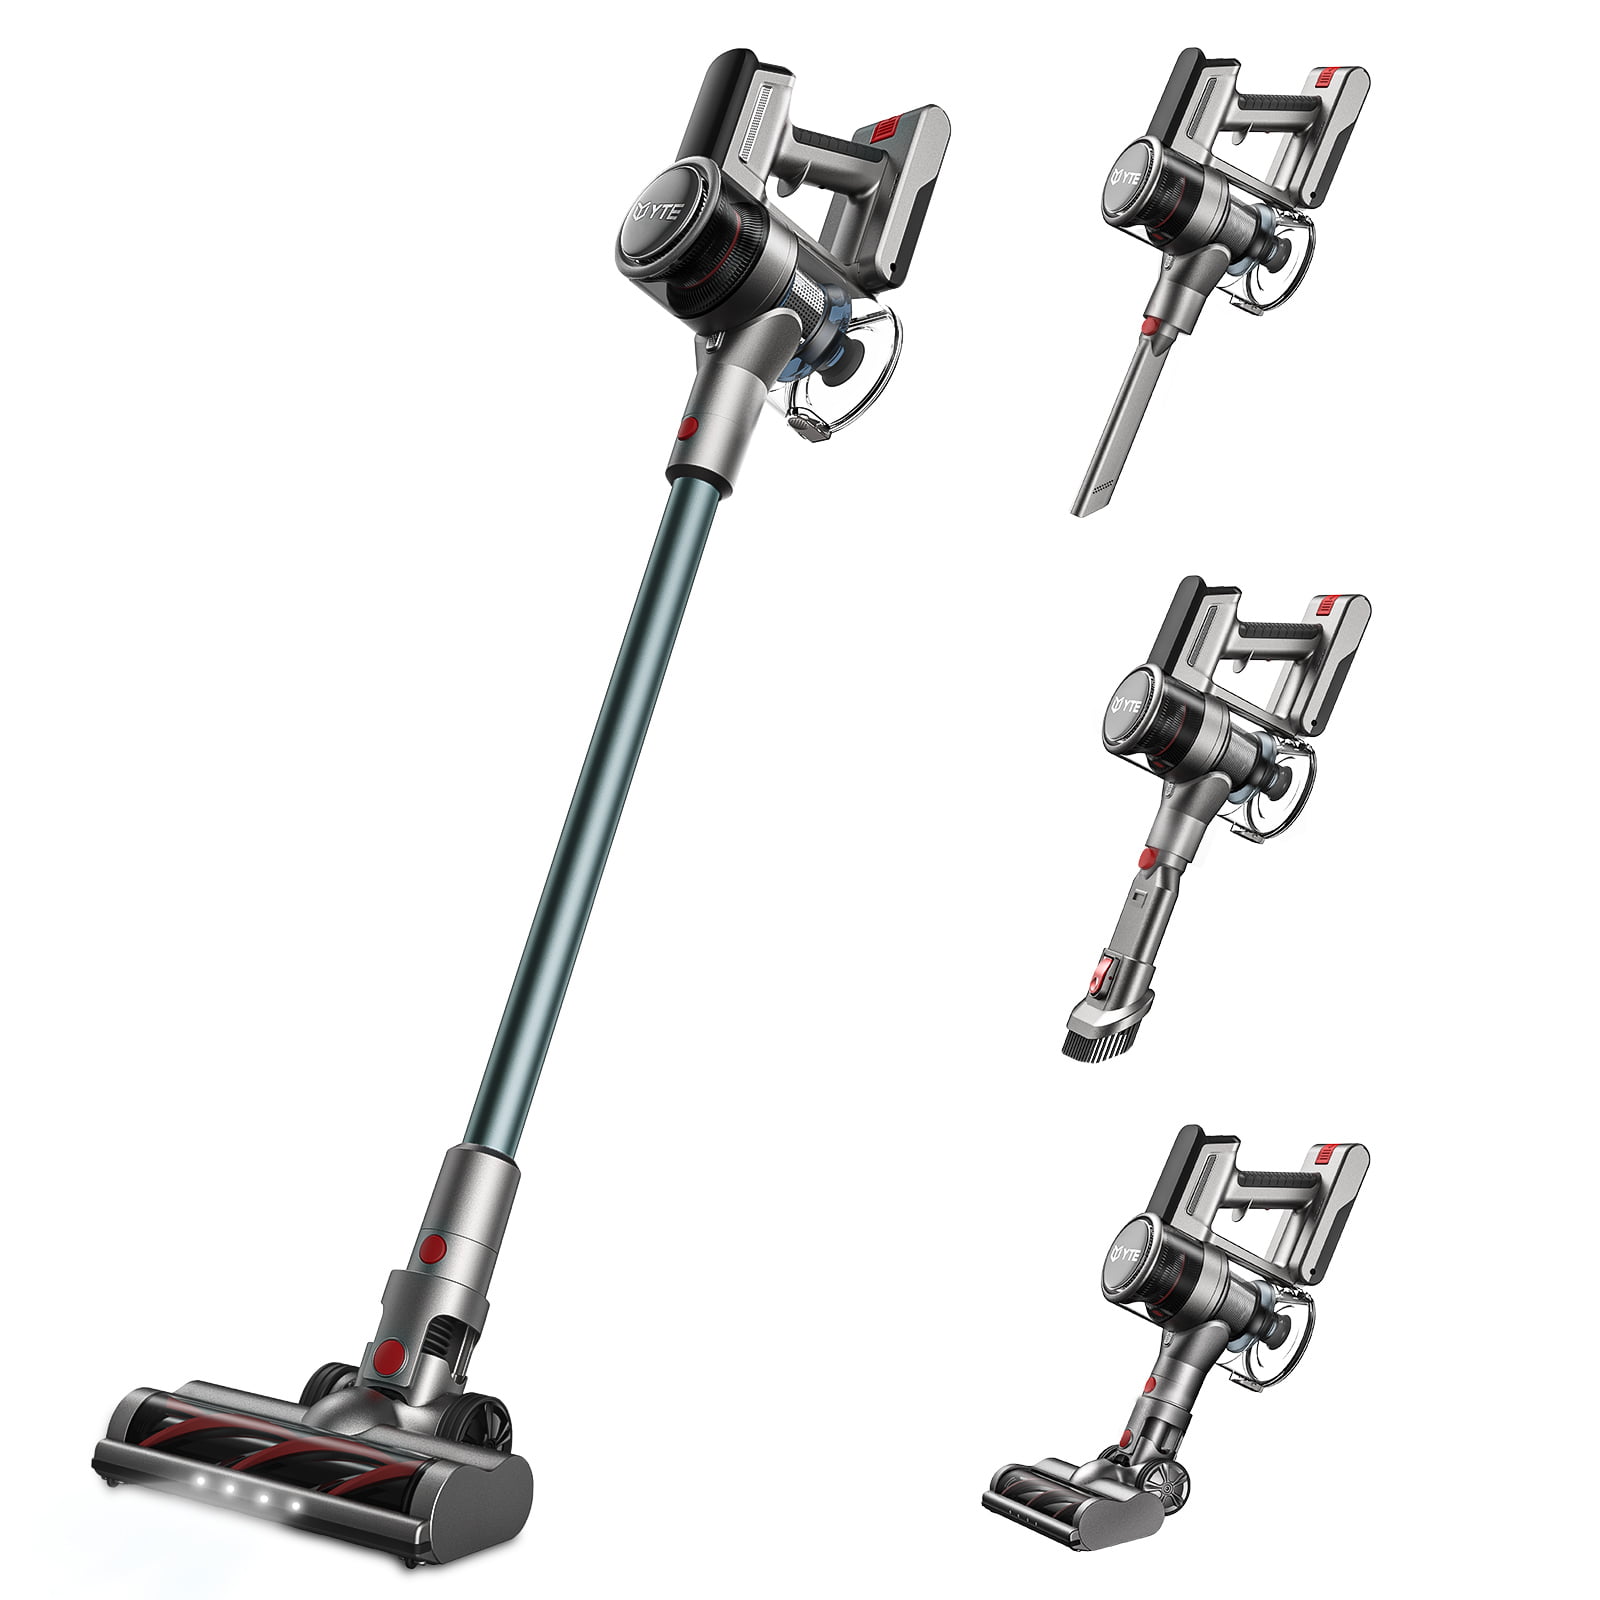 YTE Cordless Stick Vacuum Cleaner - 20806351